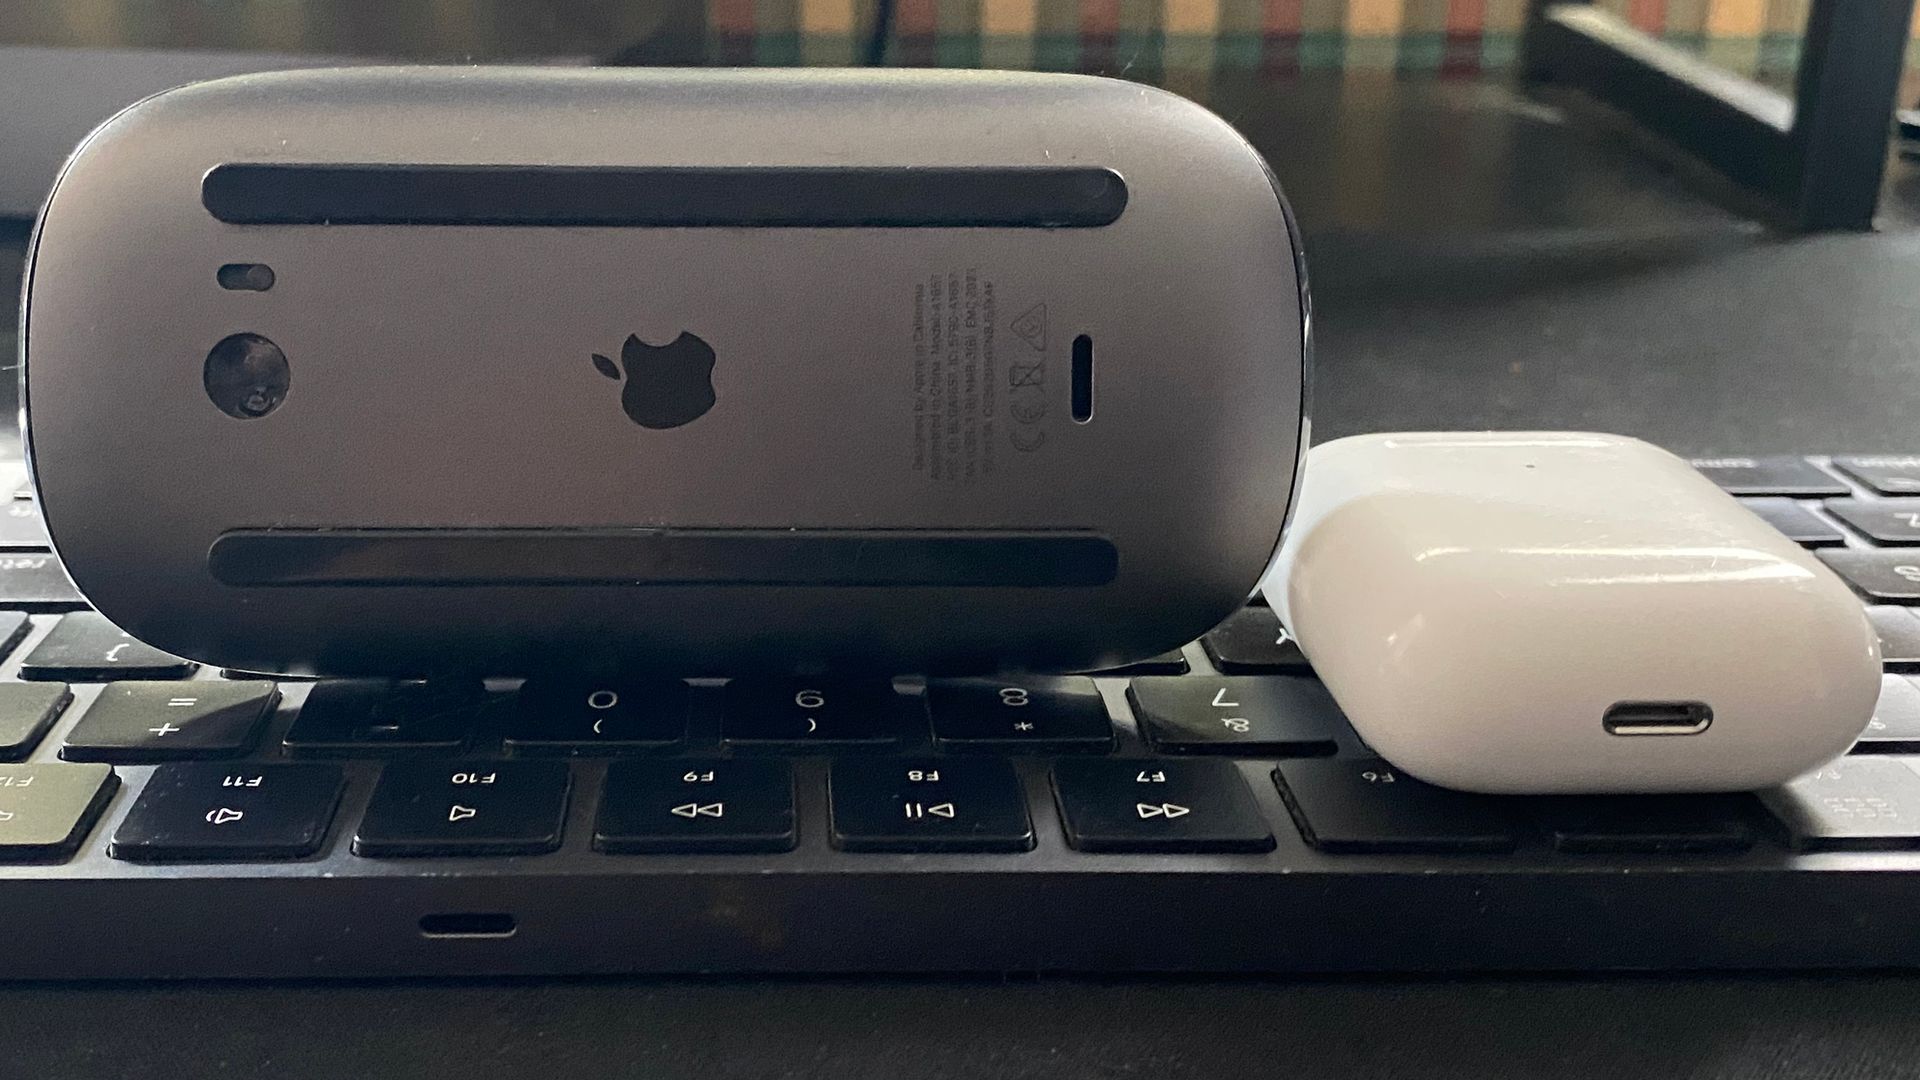 A keyboard, mouse, and AirPods that charge via Lightning.